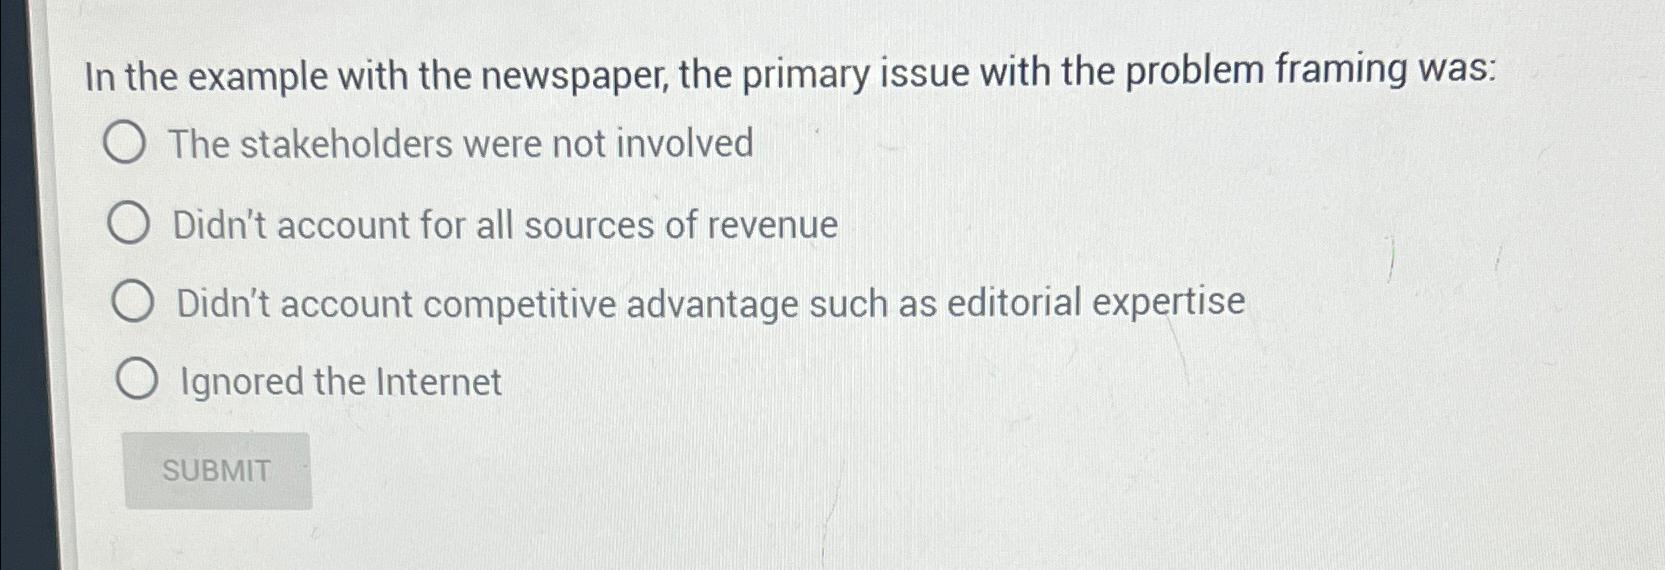 In the example with the newspaper, the primary issue with the problem framing was: O The stakeholders were